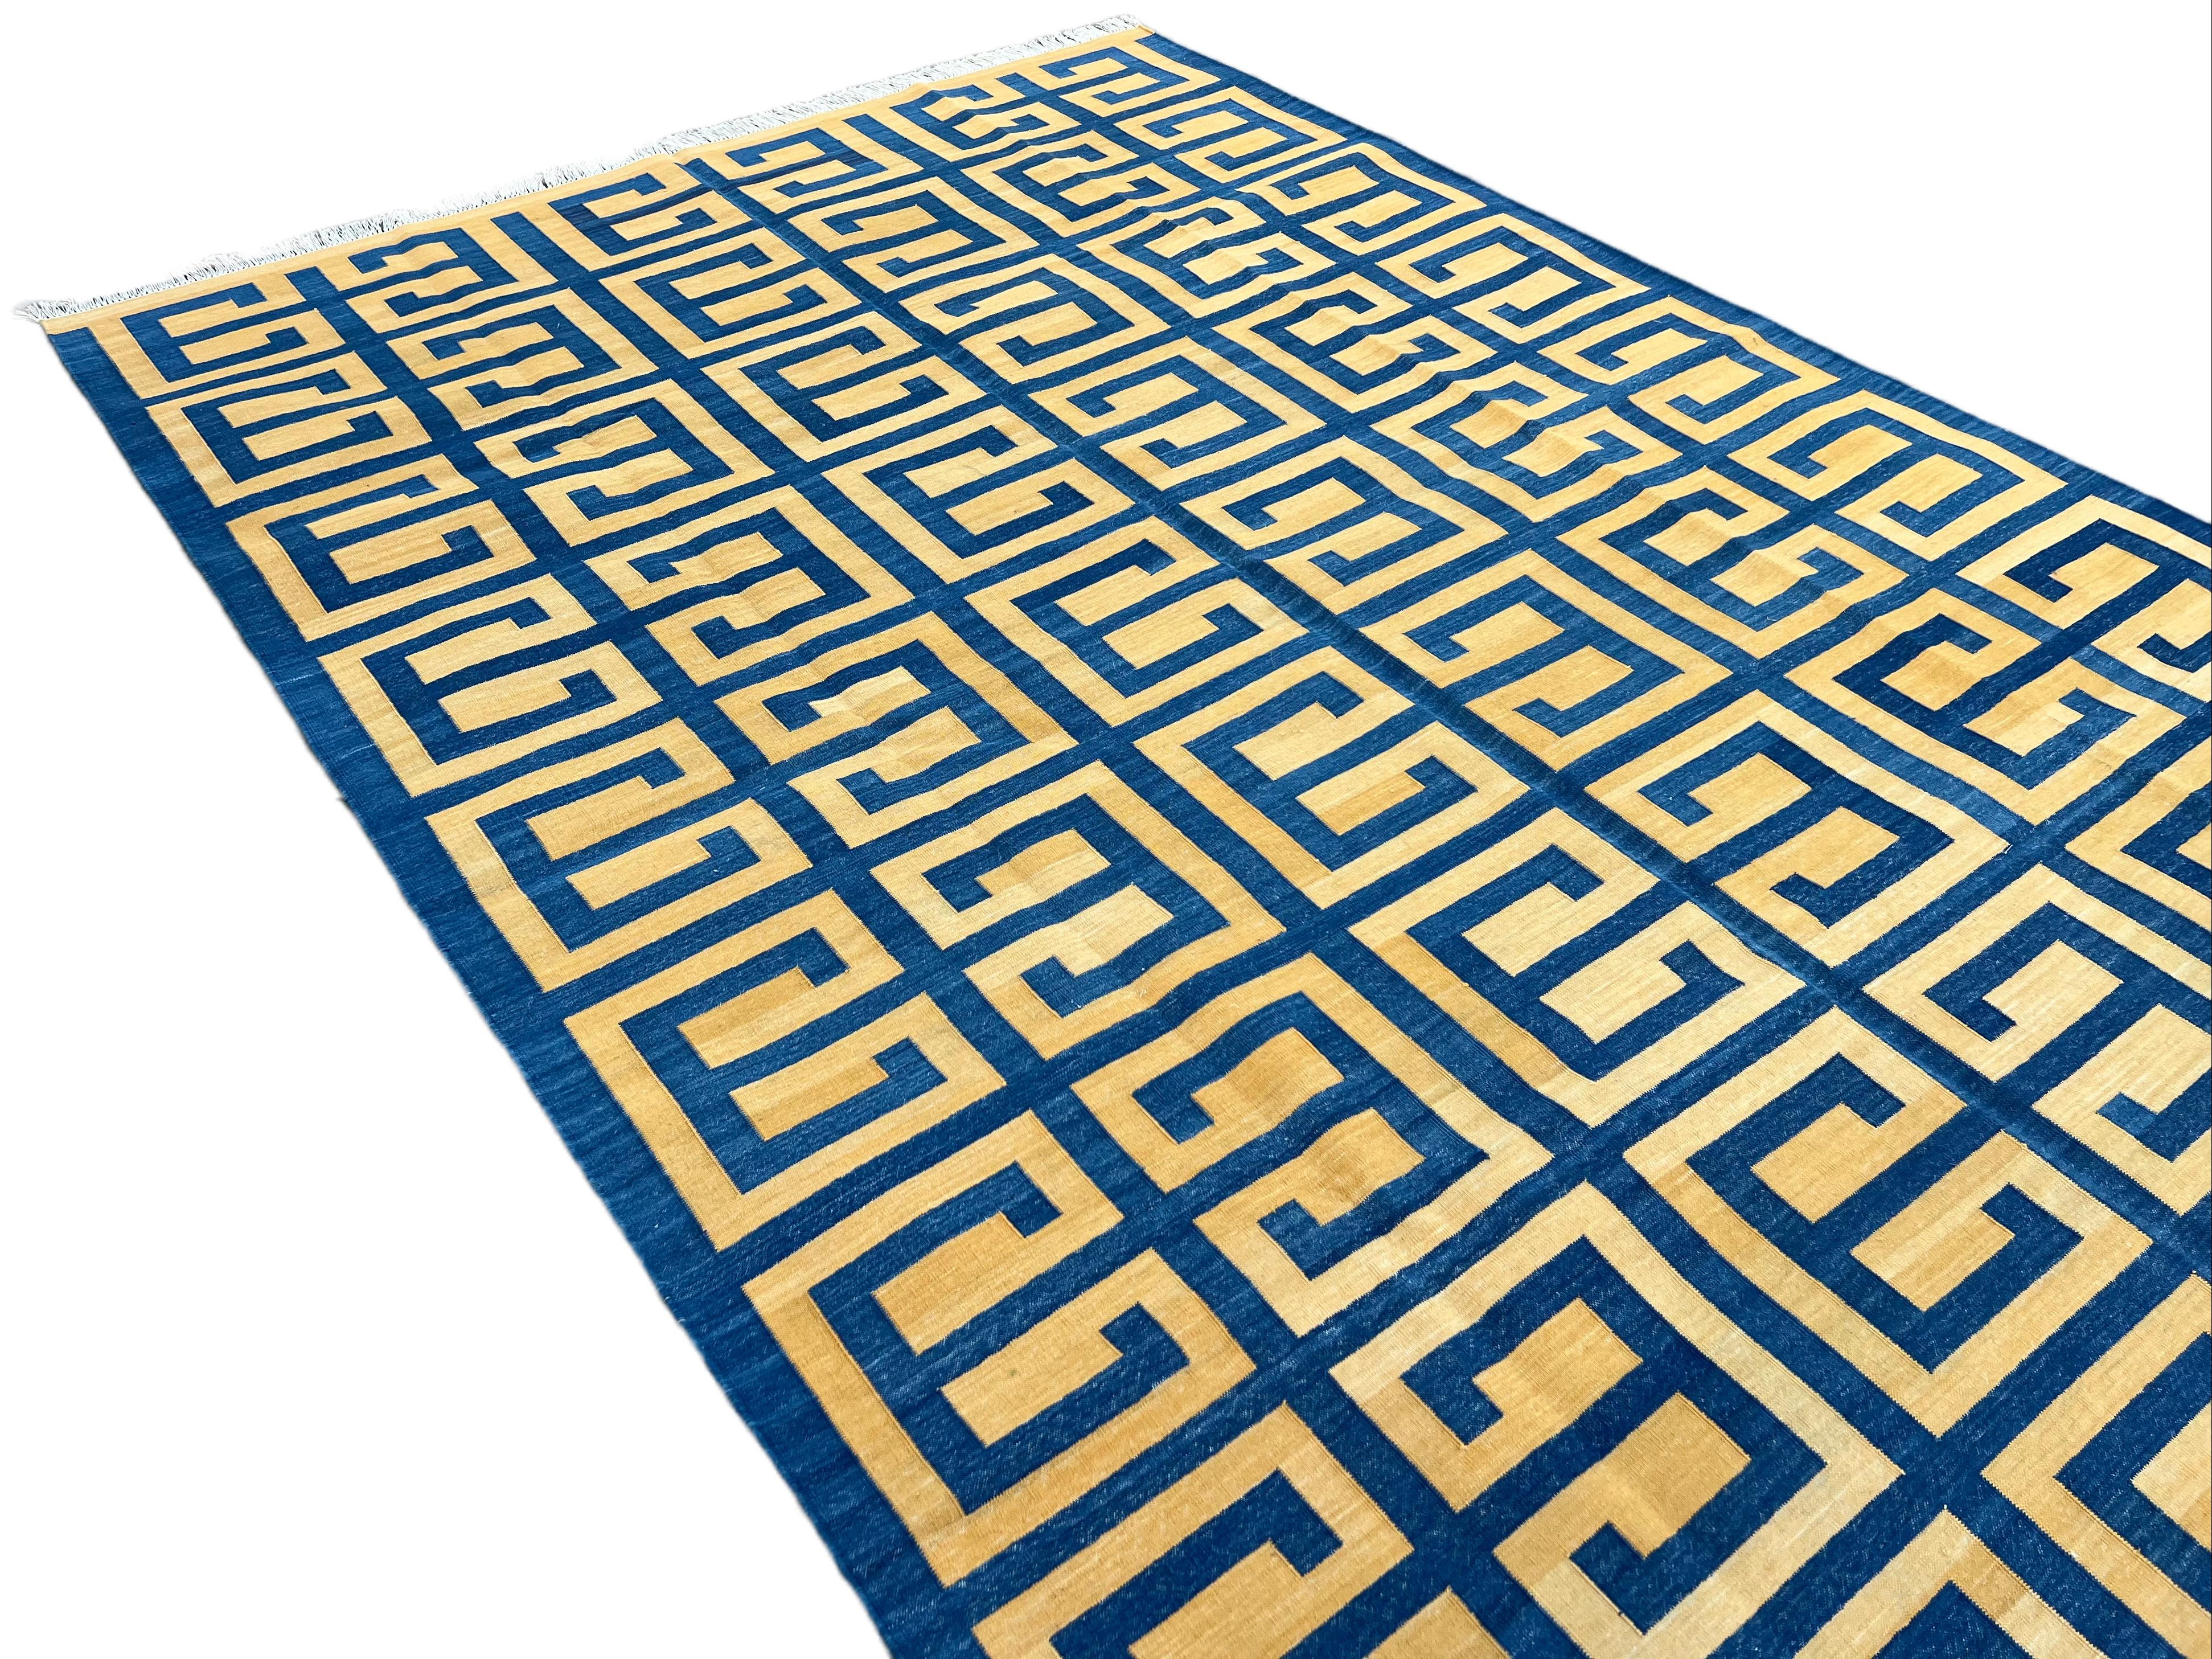 Contemporary Handmade Cotton Area Flat Weave Rug, Blue & Yellow Geometric Indian Dhurrie Rug For Sale